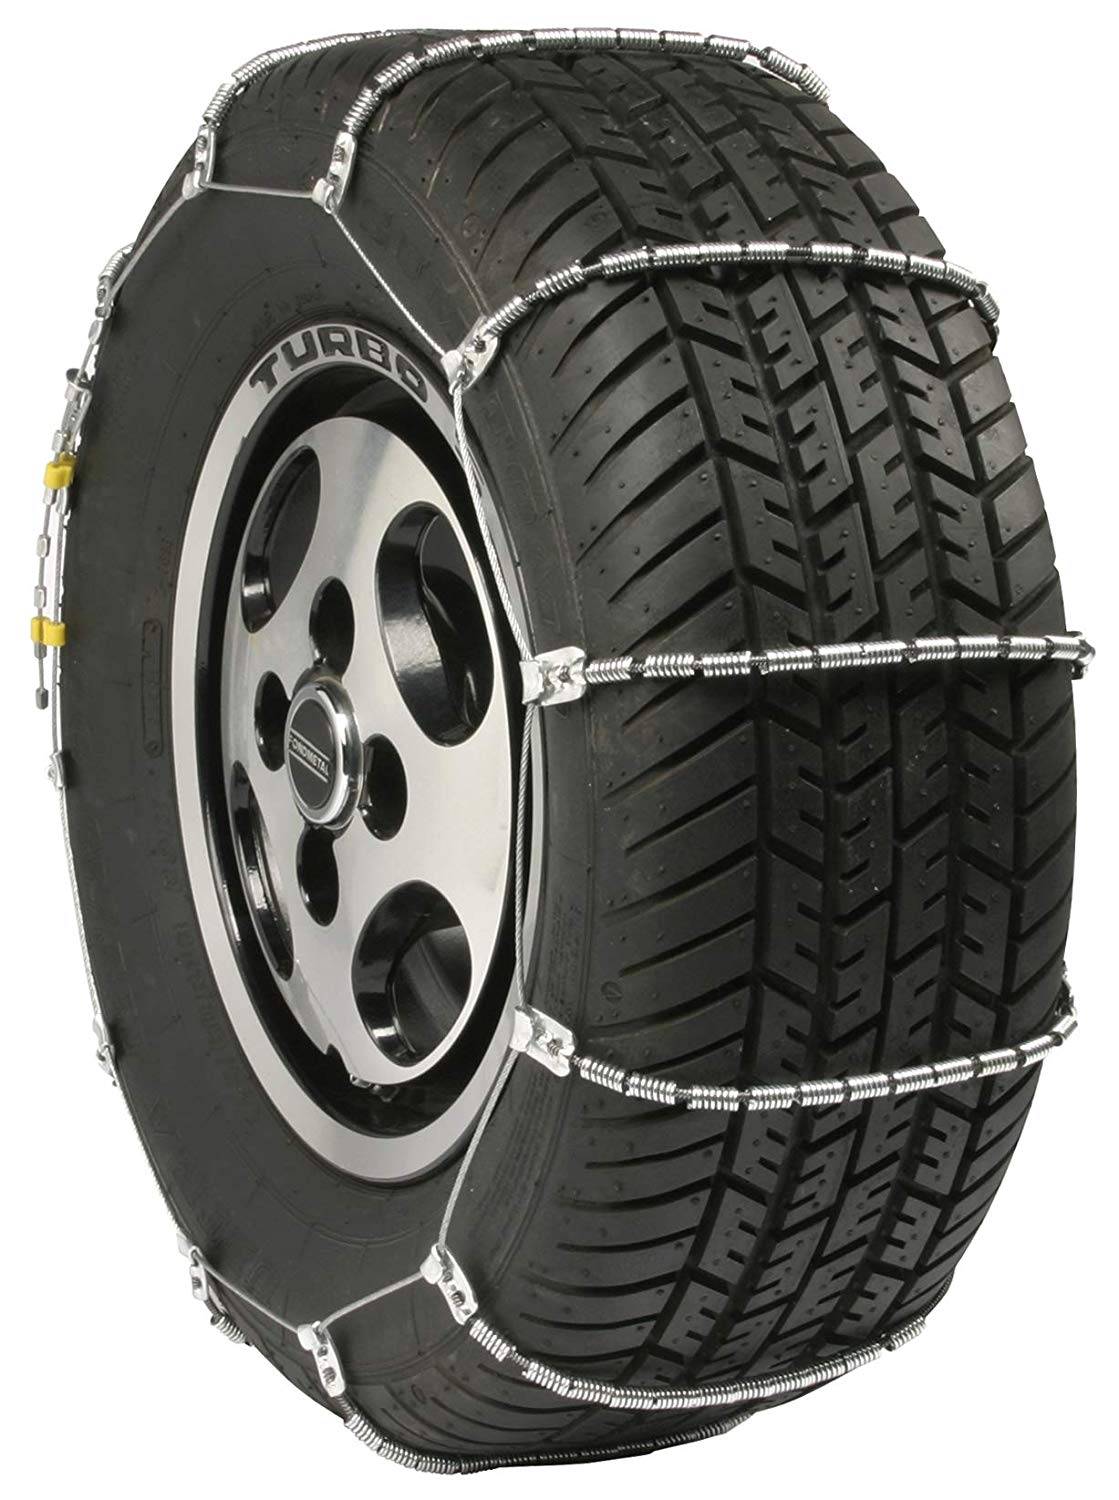 Security Chain Tire Chains Size Chart